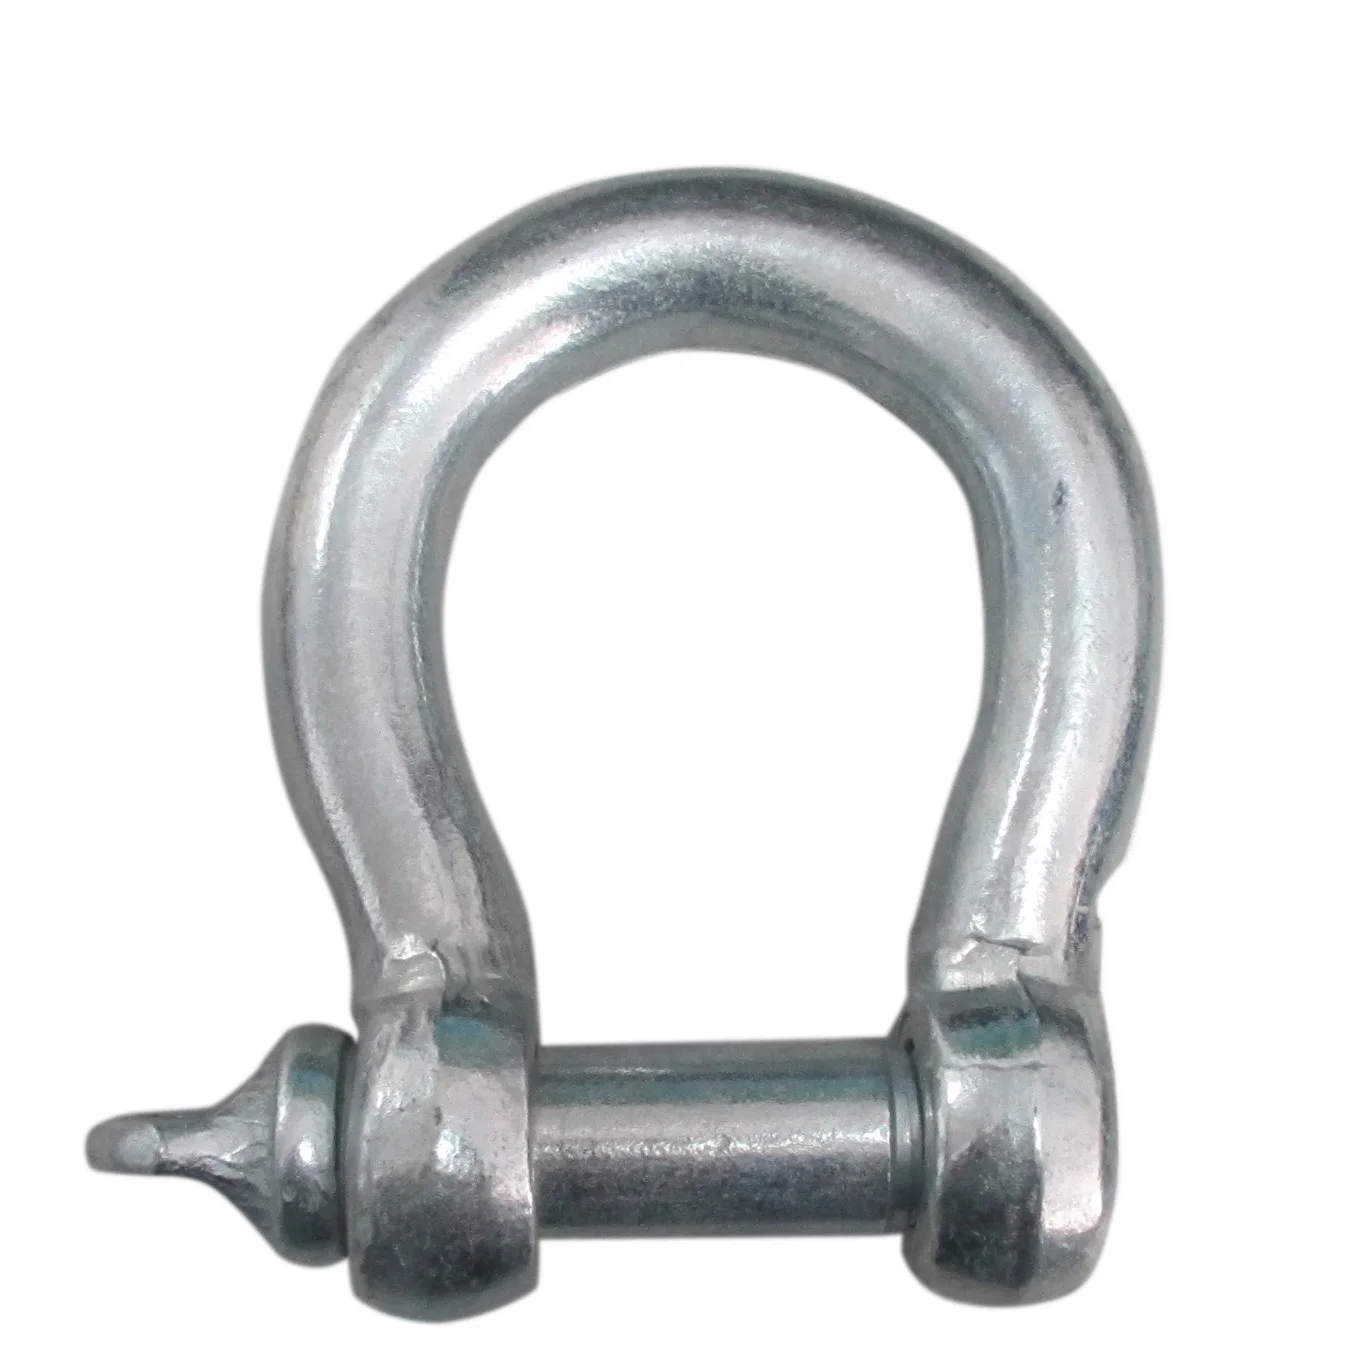 
High Strength Stainless Steel Marine Rigging Anchor Chain D Shackle Stainless Steel 